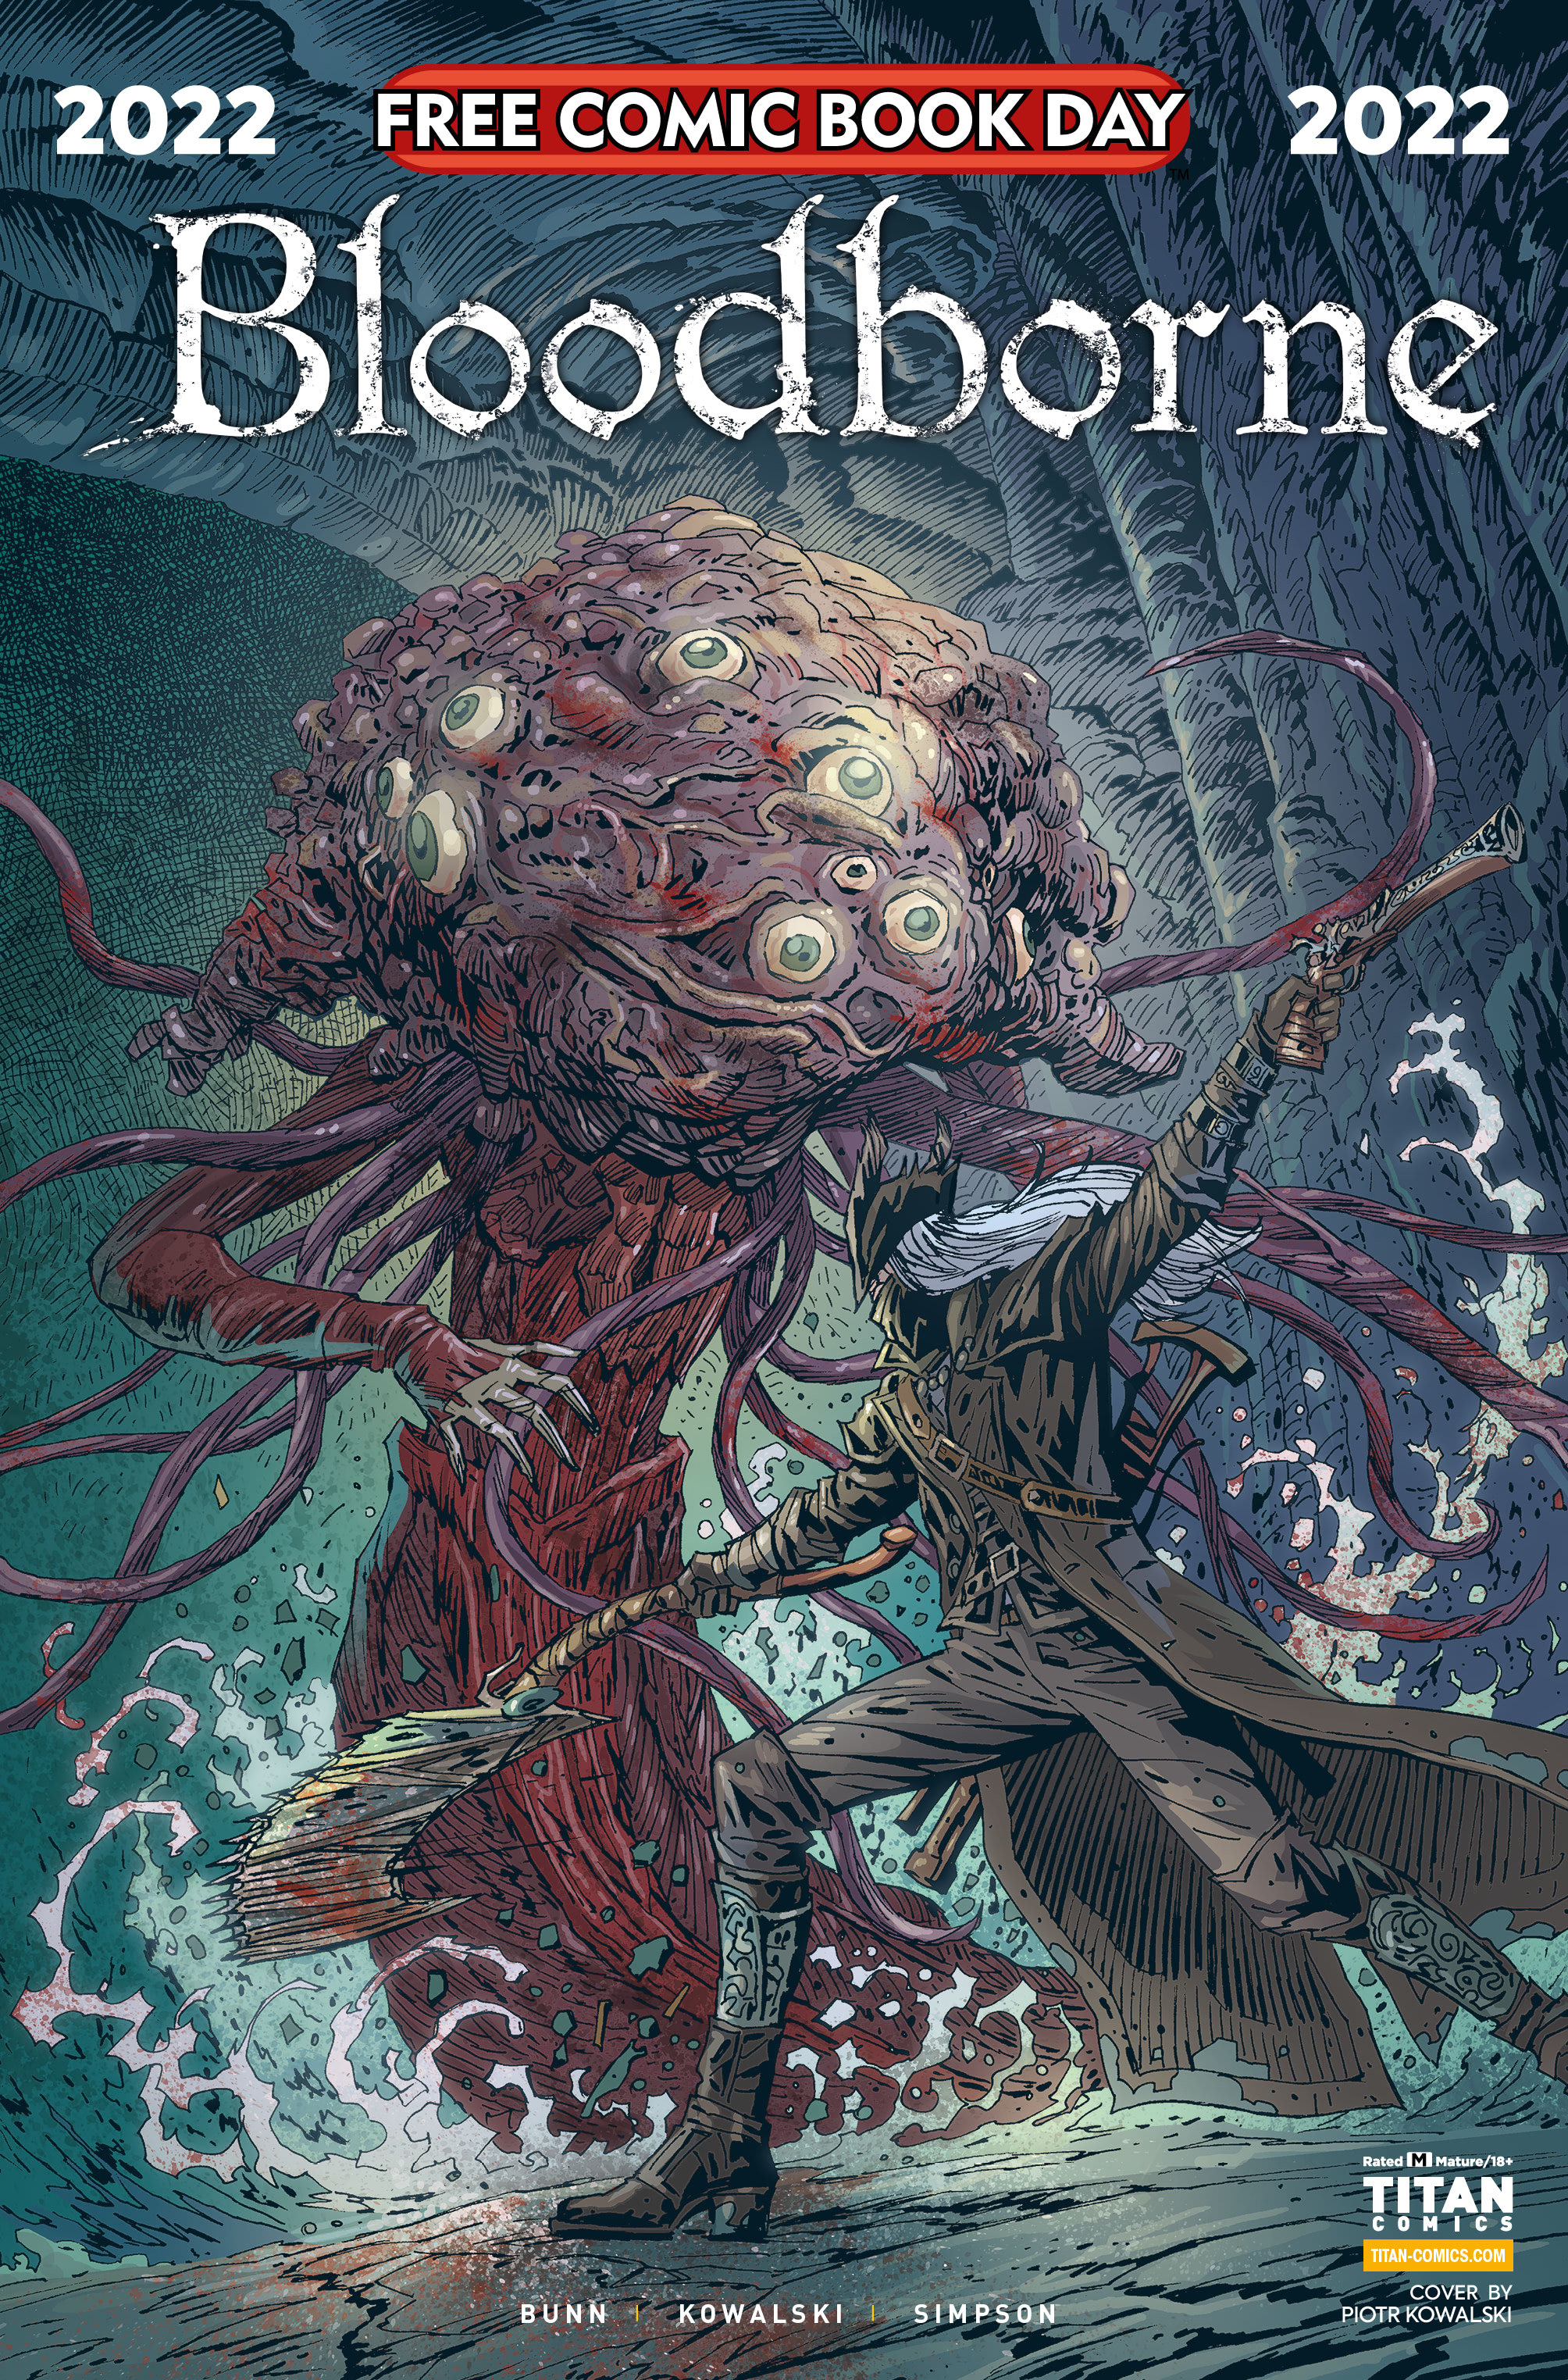 Read online Free Comic Book Day 2022 comic -  Issue # Bloodborne - 1